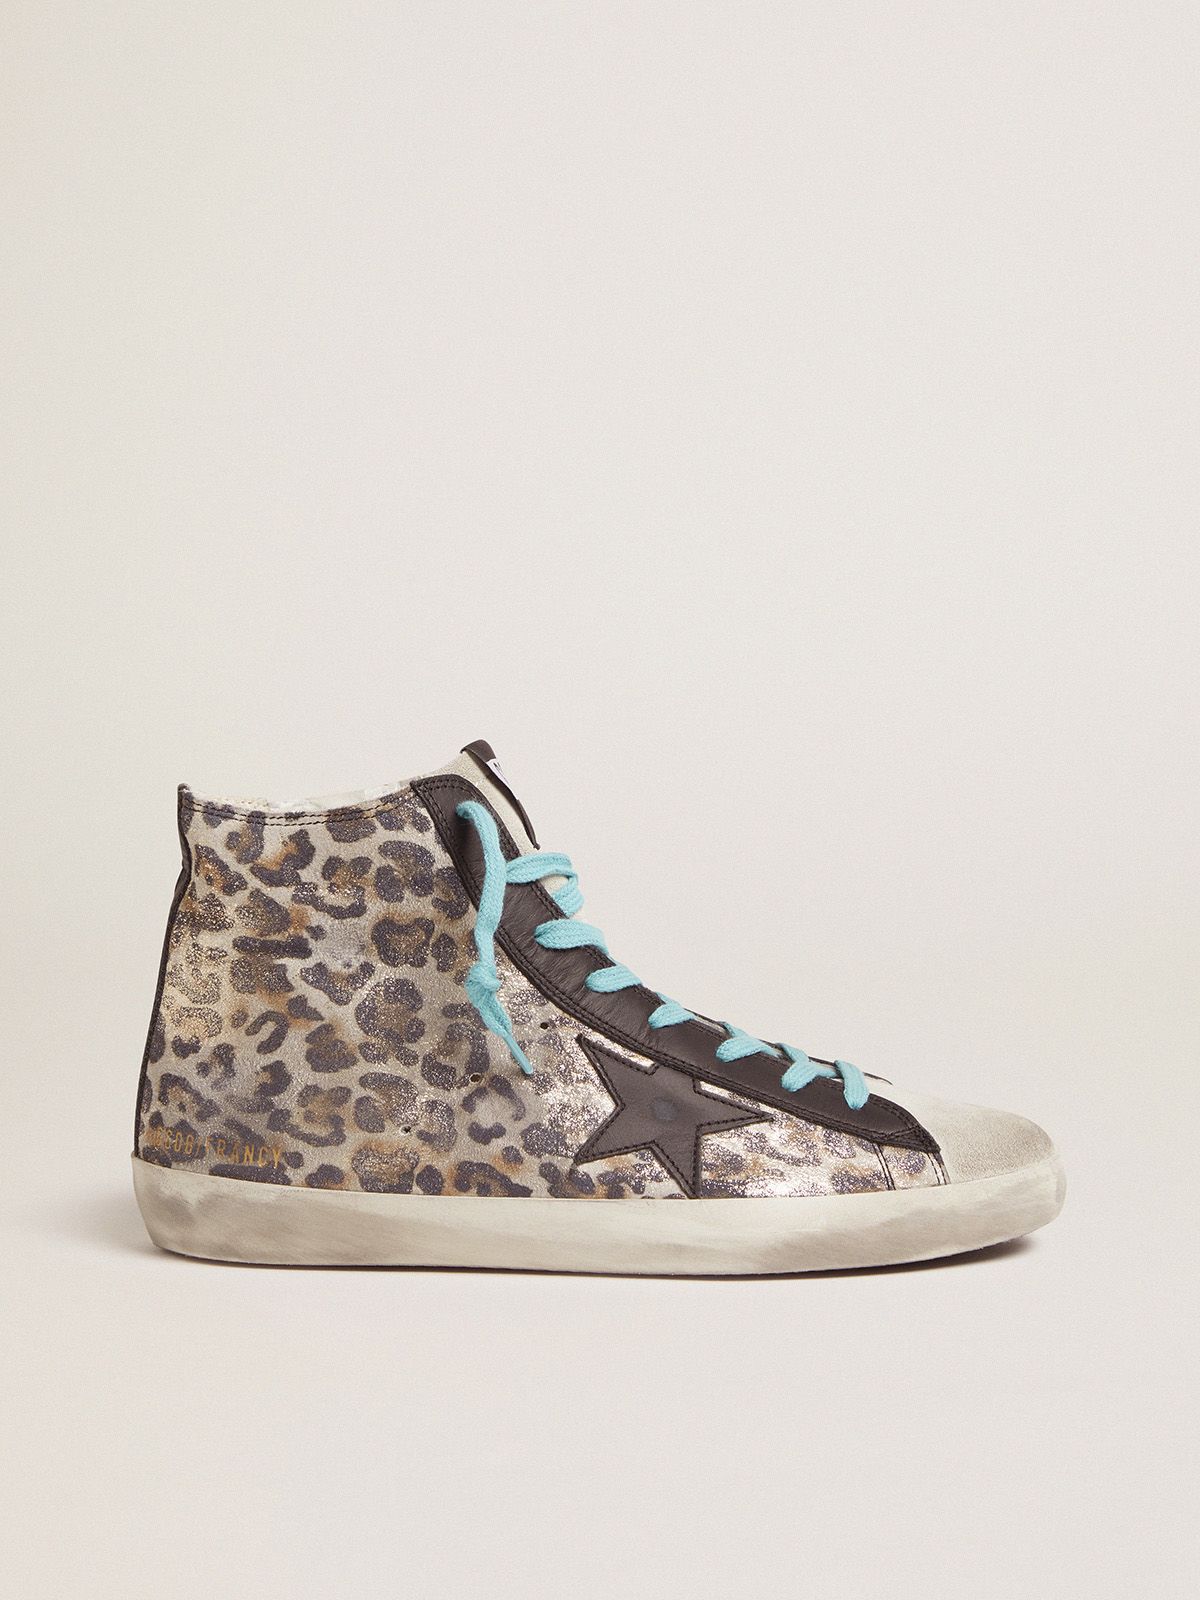 golden goose with sneakers Francy laces Leopard-print blue